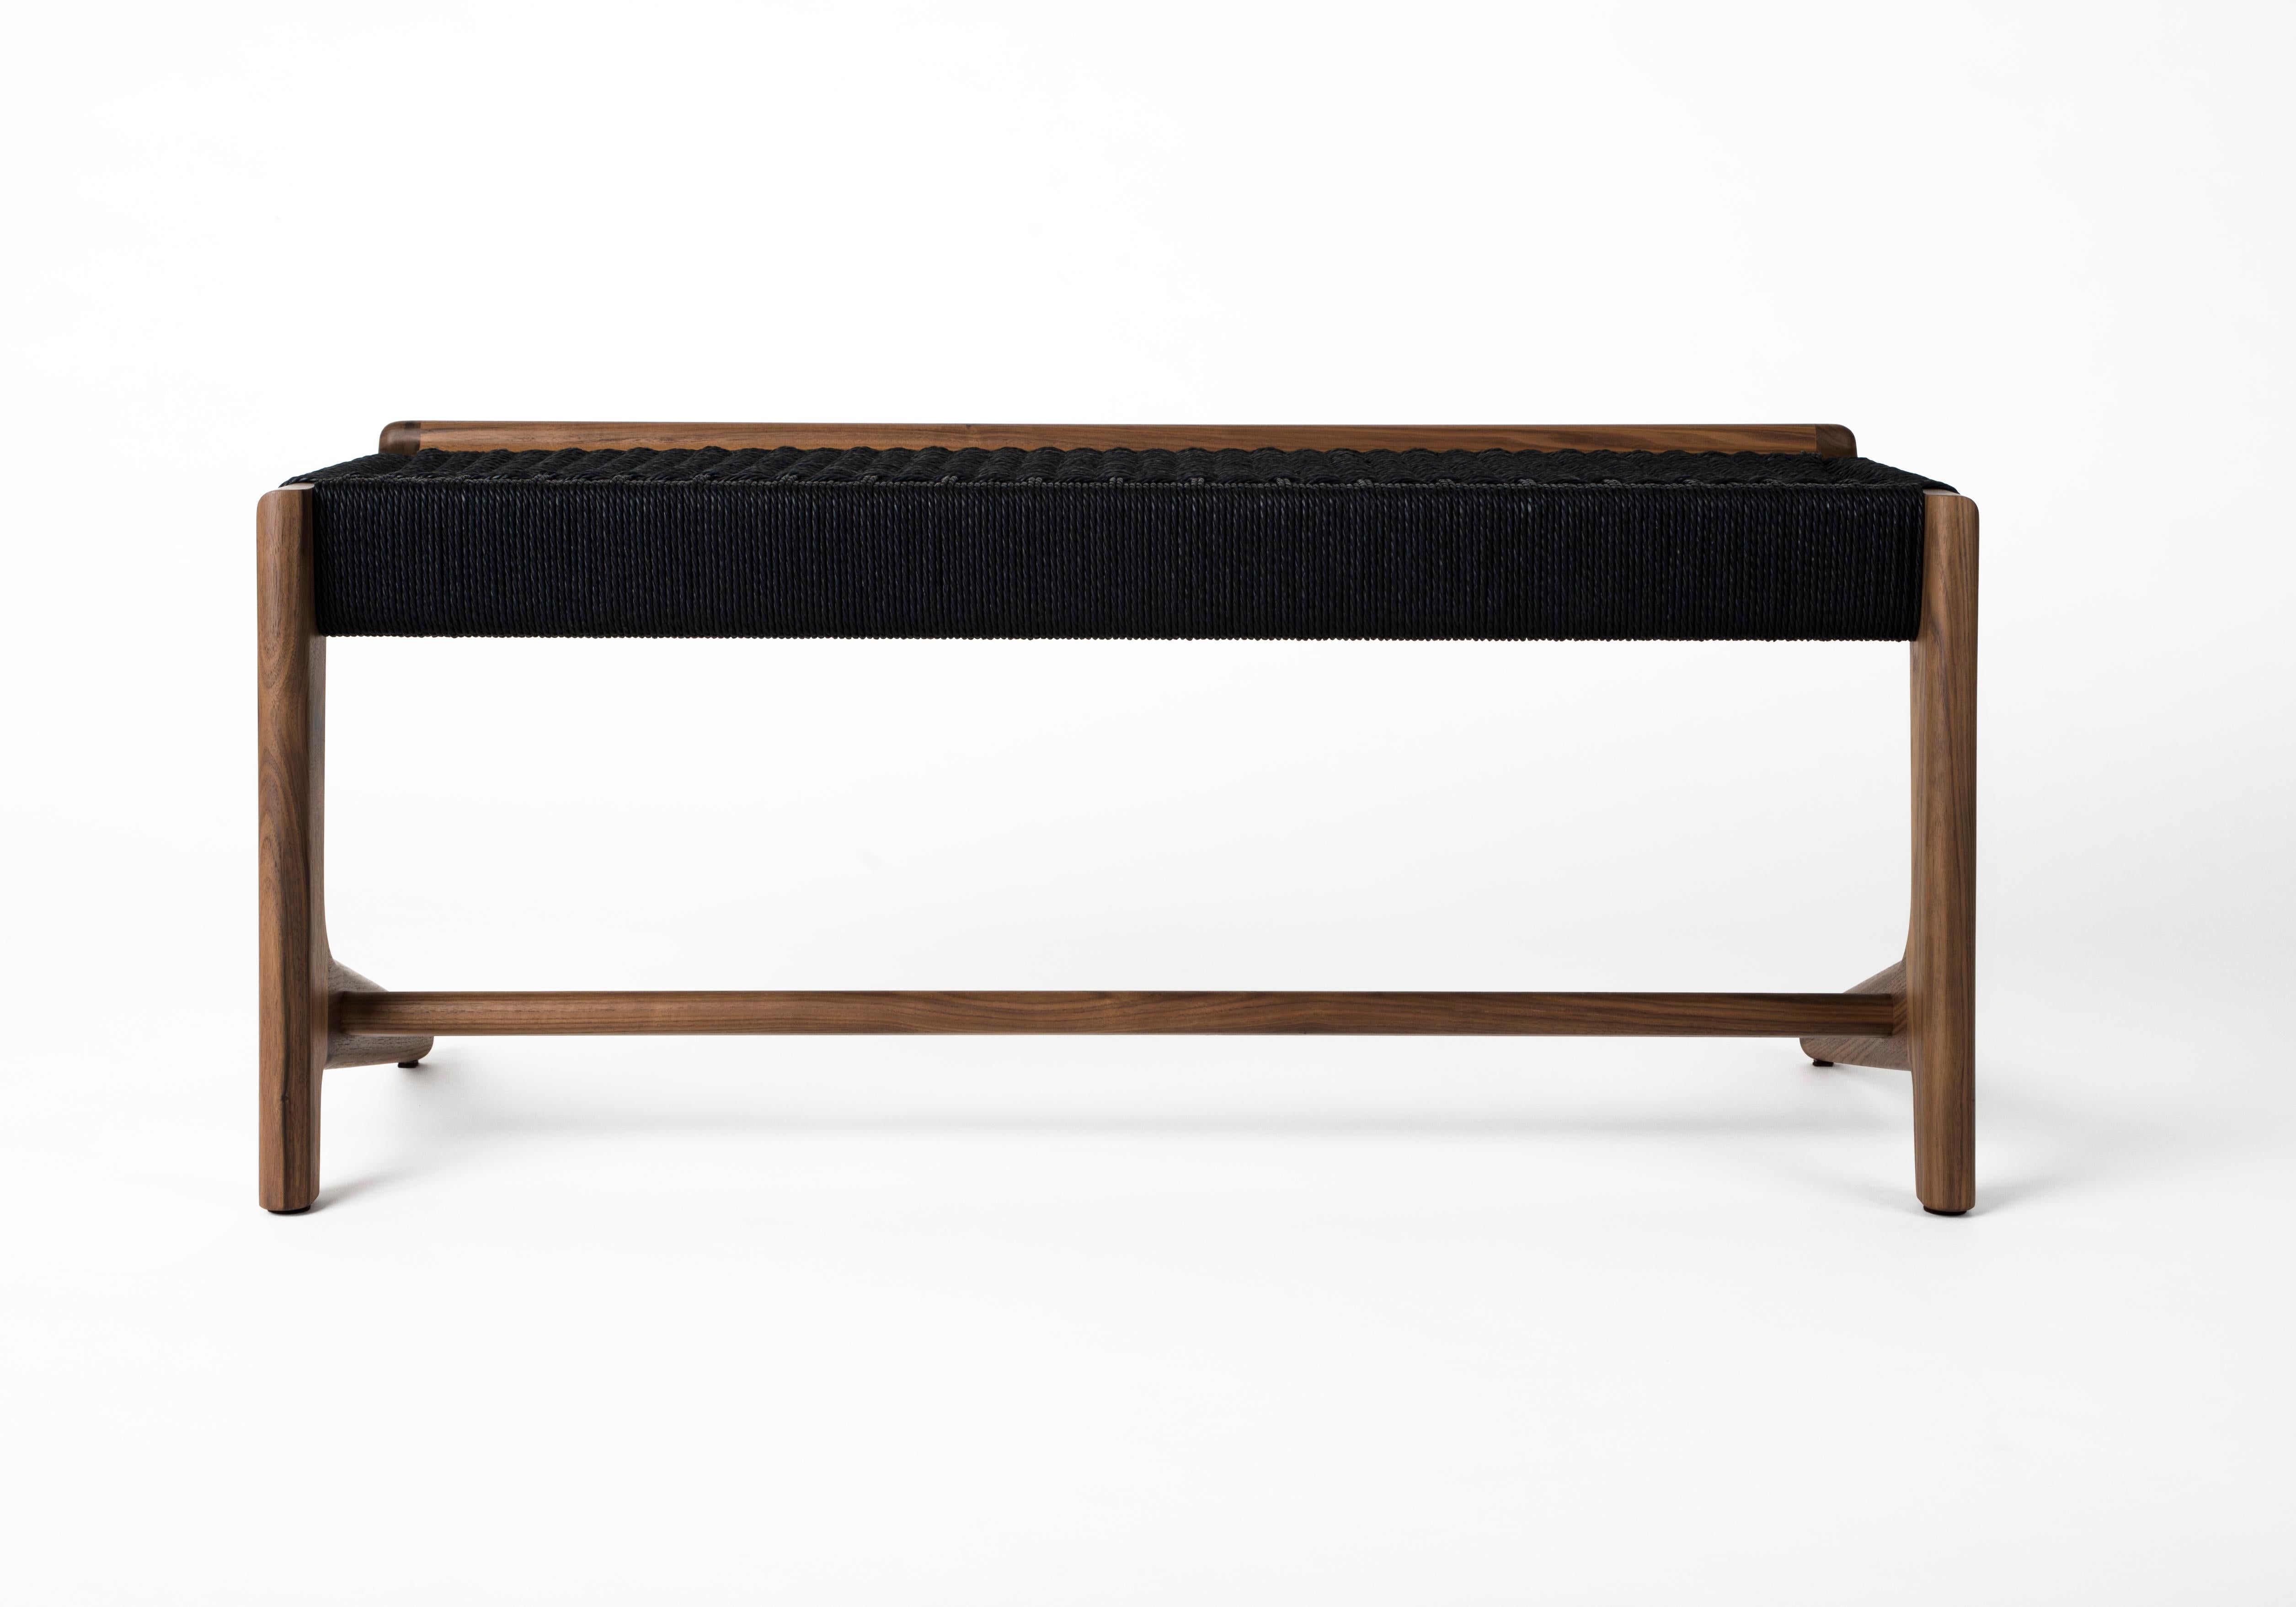 Mid-century inspired Rian Cantilever Bench in Walnut with black danish cord. Custom sizes available. Can be made with any domestic or exotic hardwood of your choosing. Danish cord comes in three colors: Kraft, White and Black. The Danish cord has